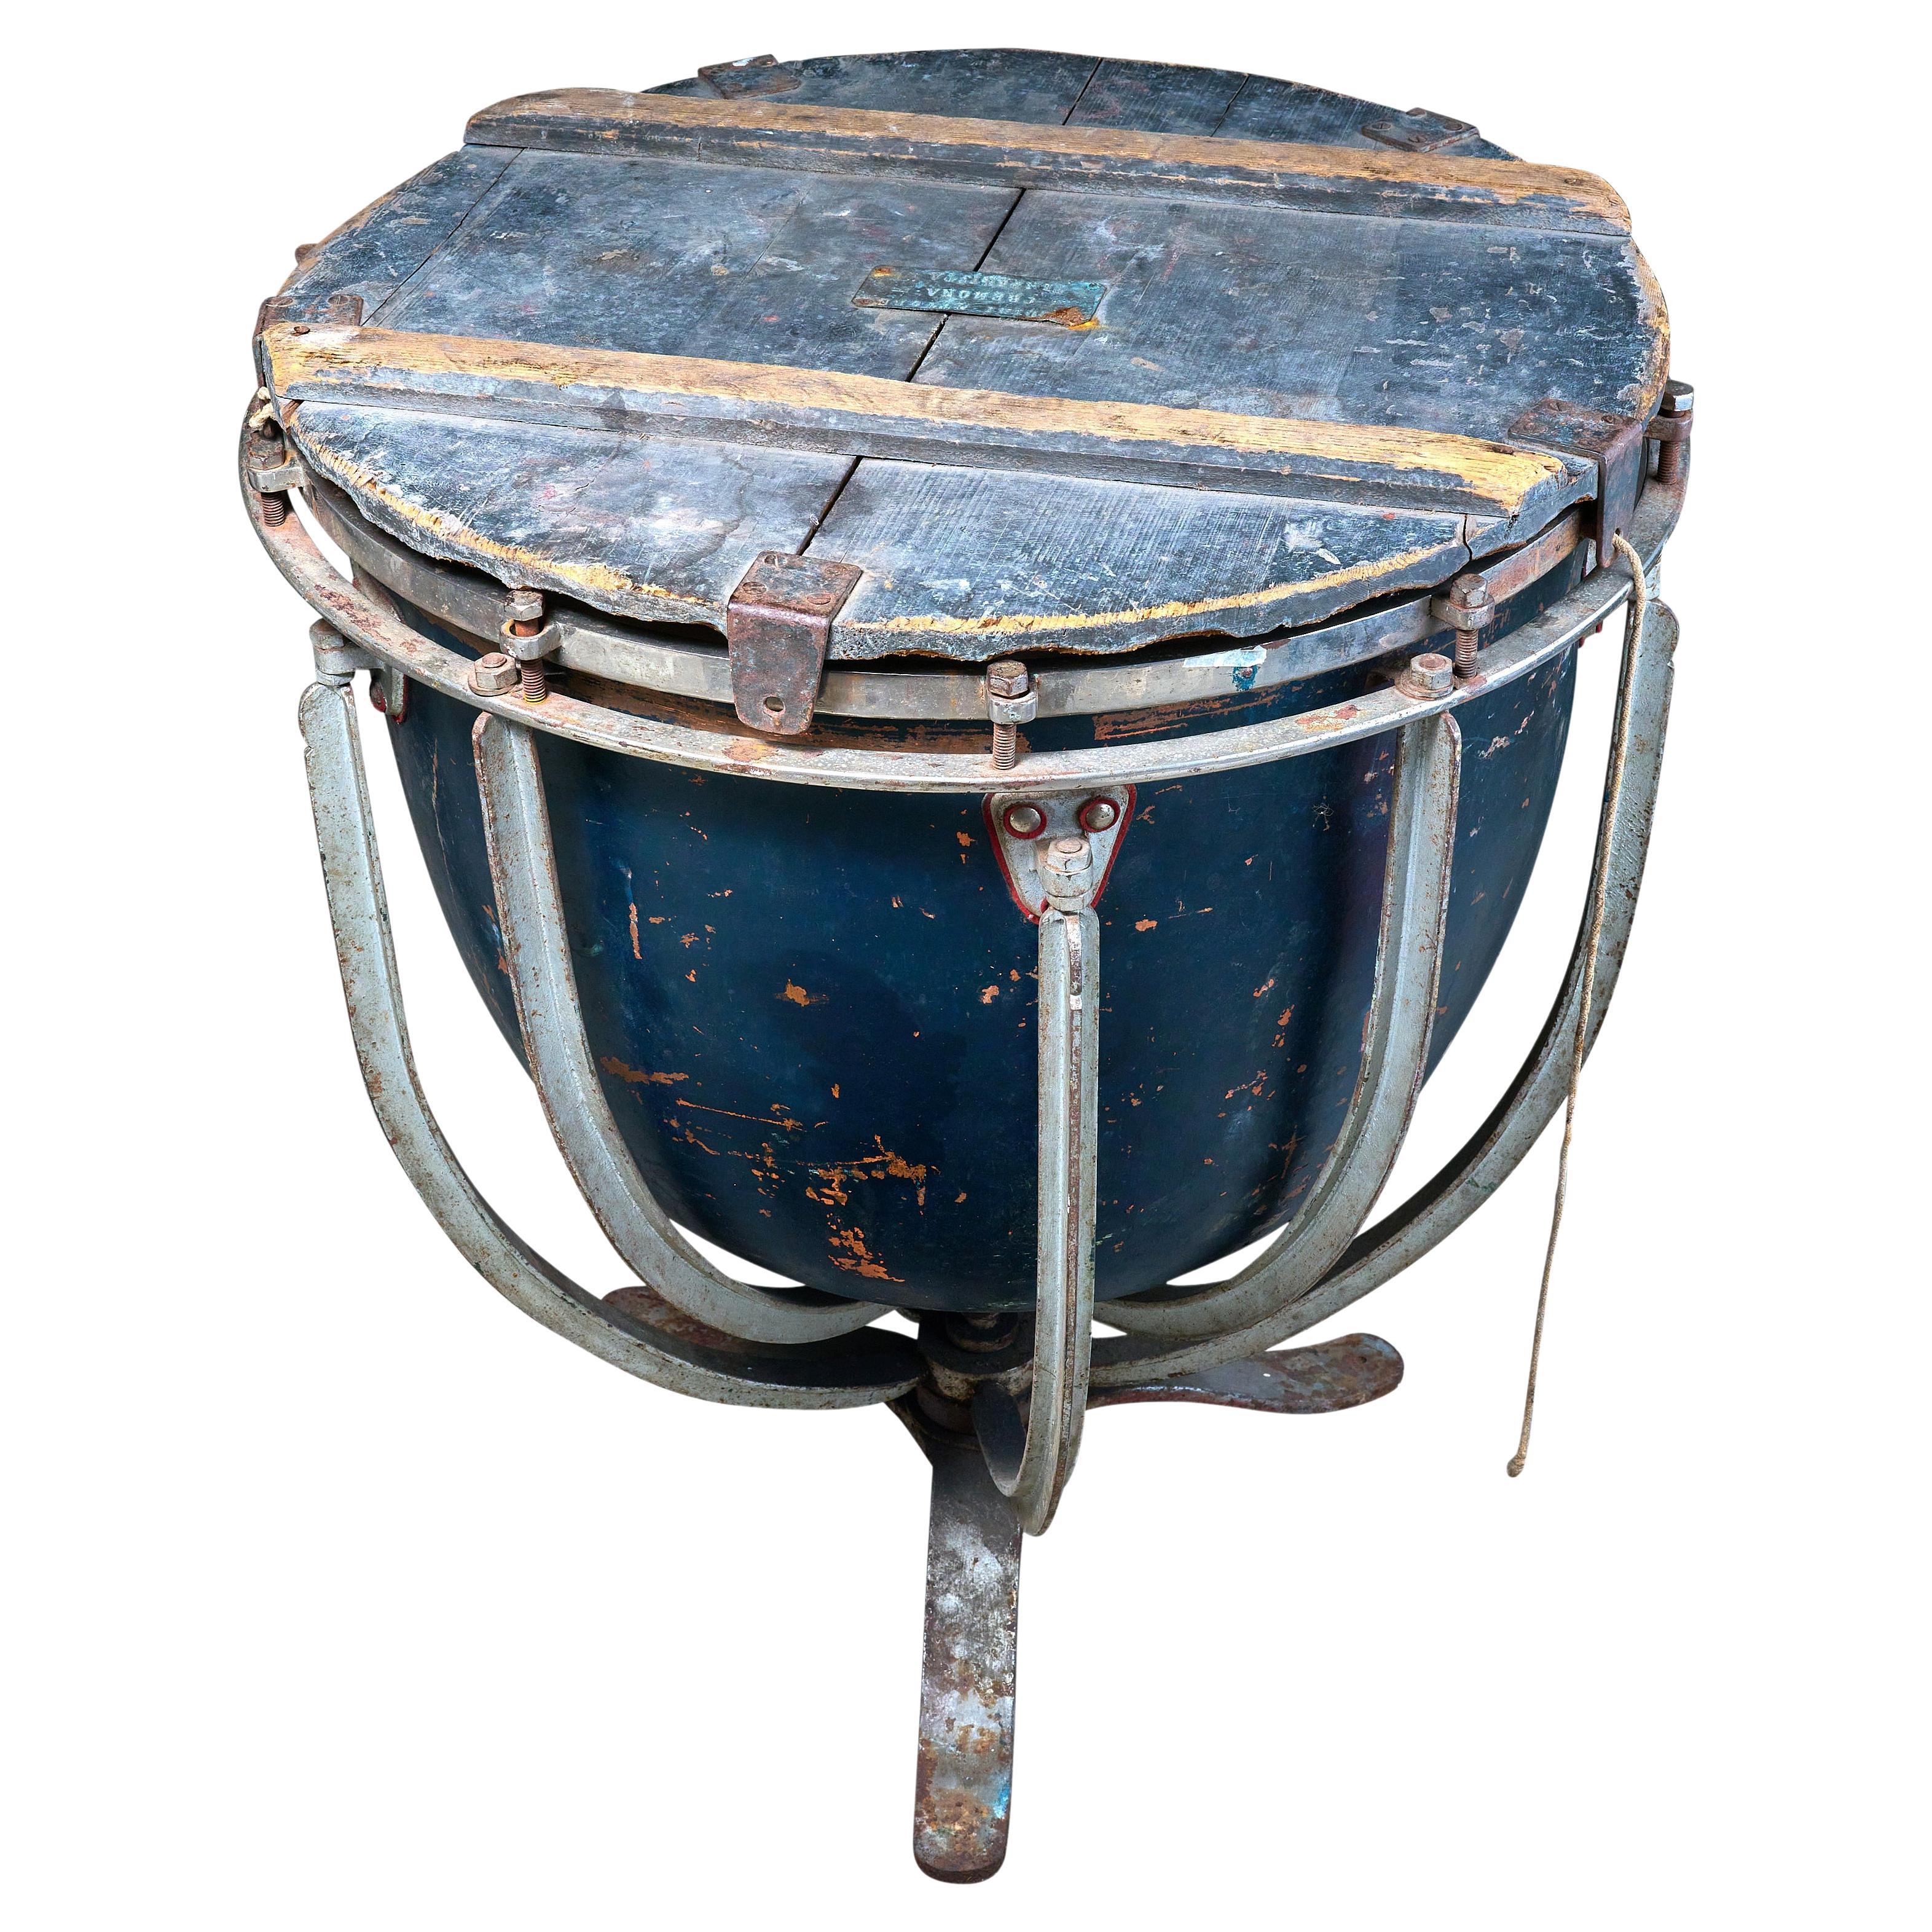 Italian Kettle Drum with Cover